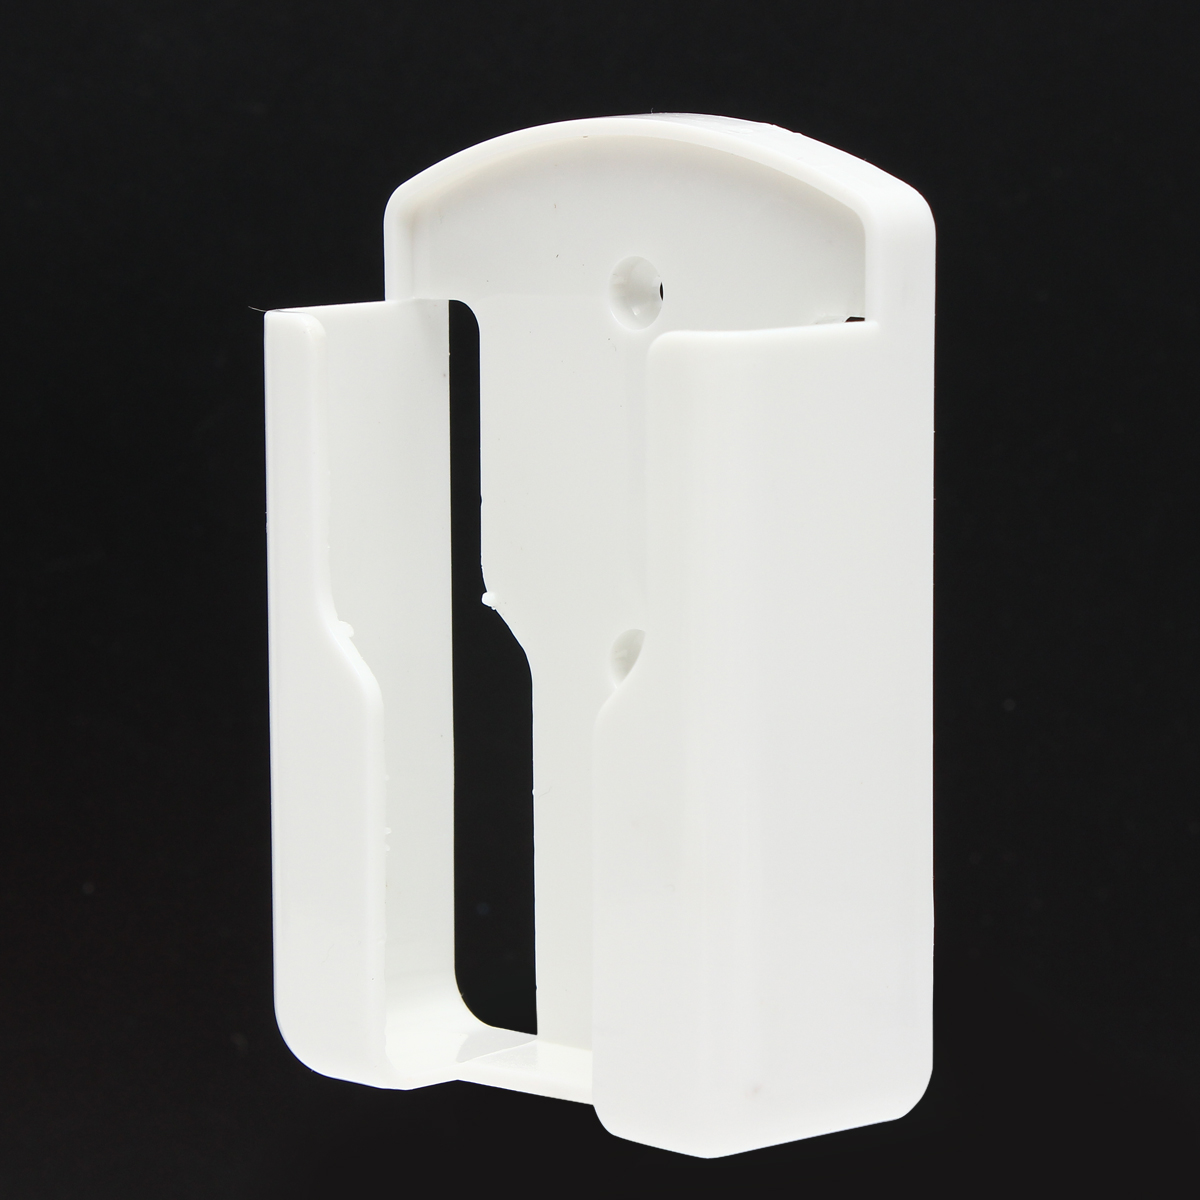 Universal-Air-Conditioner-Remote-Control-Holder-Wall-Mounted-Storage-Box-White-1130181-3